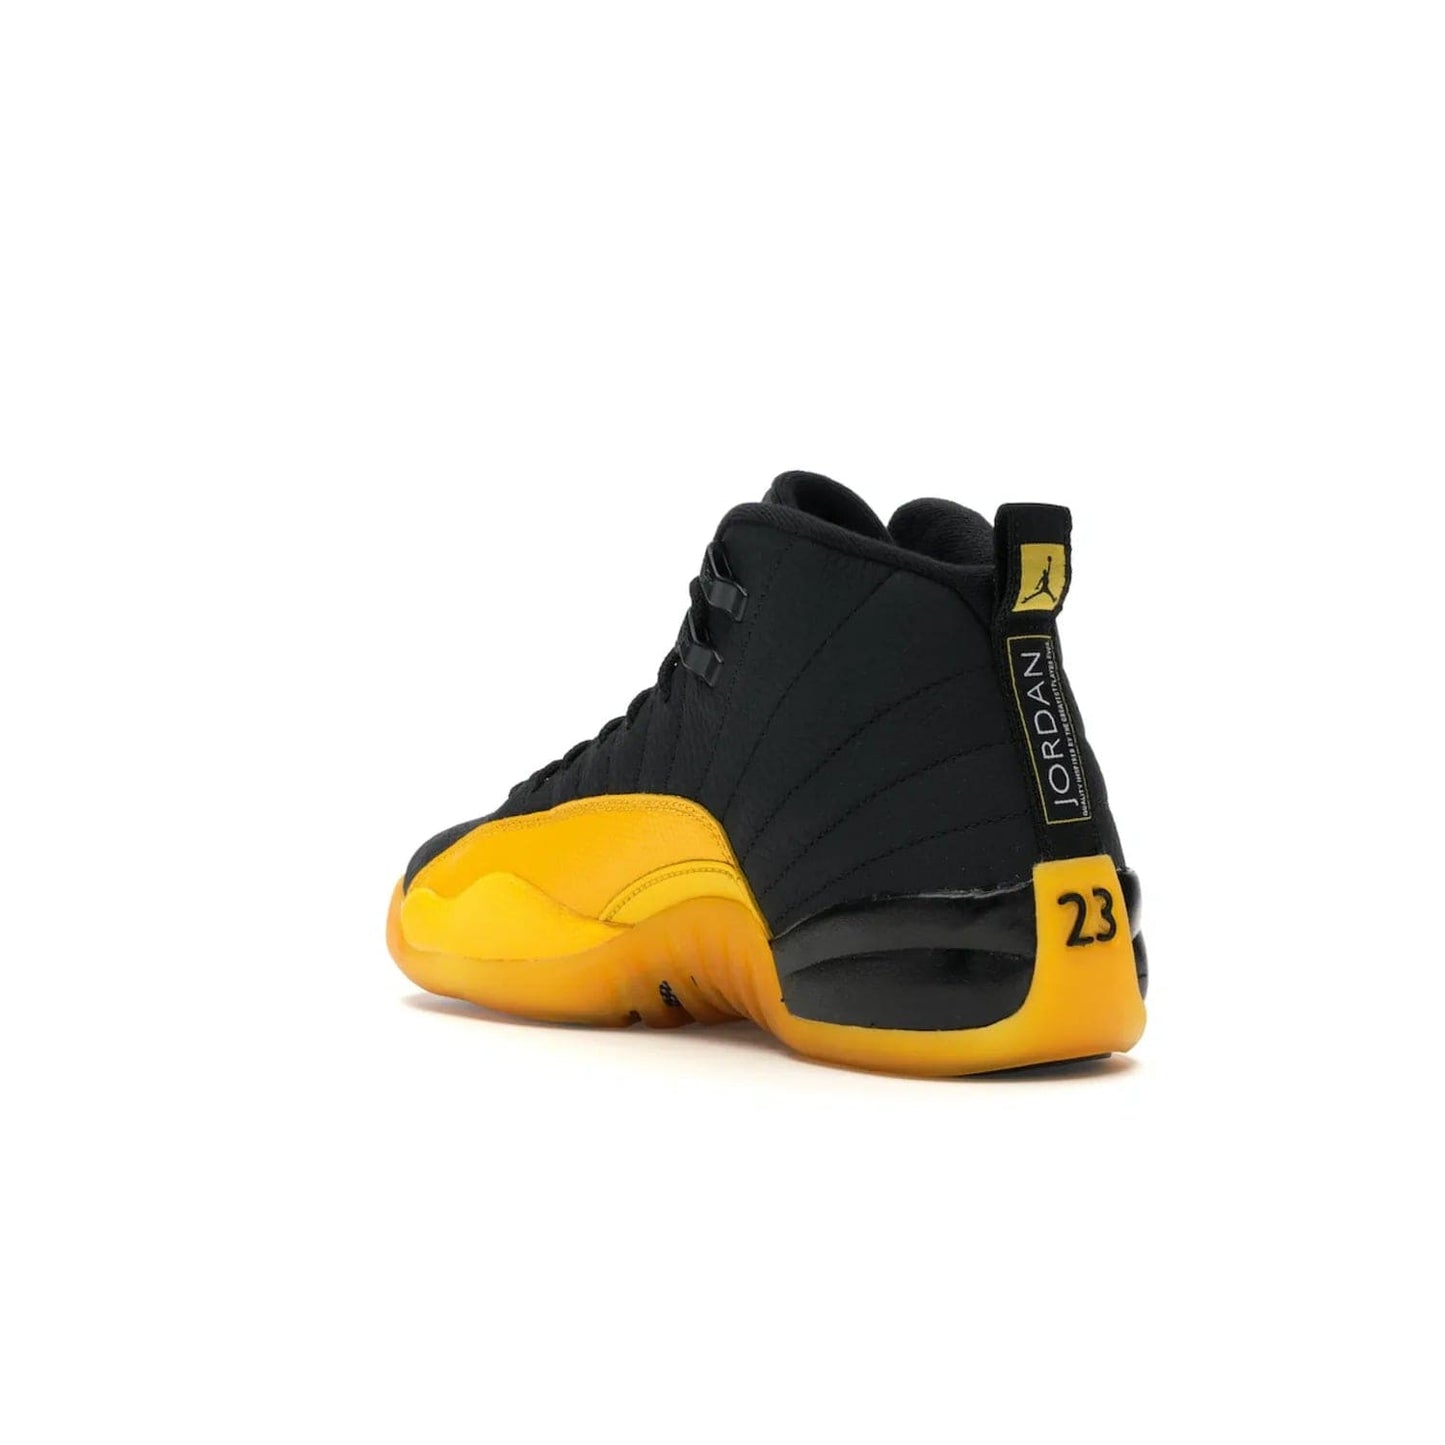 Jordan 12 Retro Black University Gold (GS) - Image 24 - Only at www.BallersClubKickz.com - Upgrade your kid's shoe collection with the Jordan 12 Retro Black University Gold. With classic style, black tumbled leather upper, and University Gold accents, it's a great summer look. Out July 2020.